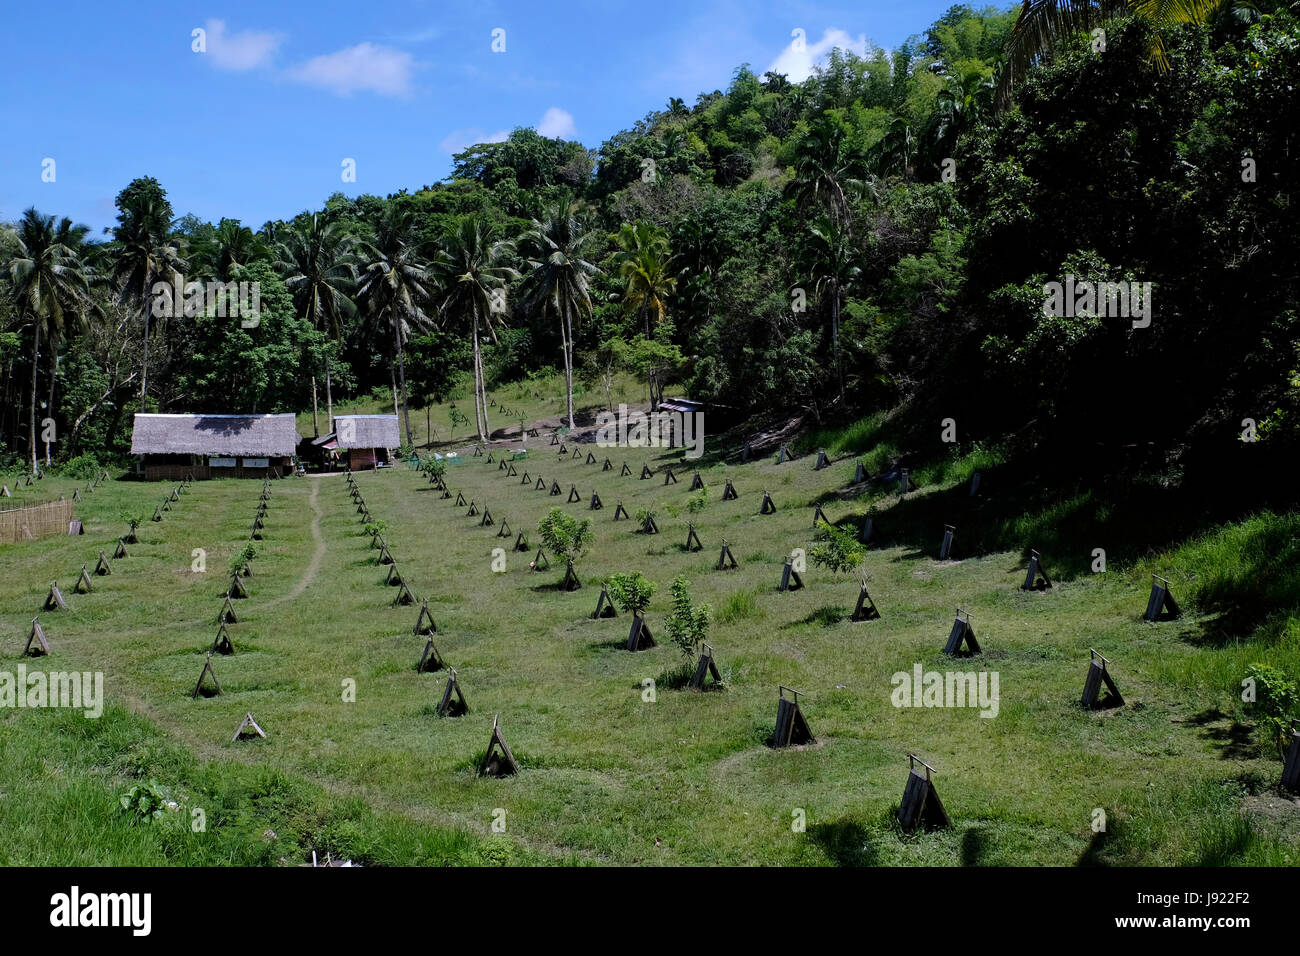 View of a Sabong cockfighting game farm in the island of Bohol located in the Central Visayas region of the Philippines Stock Photo